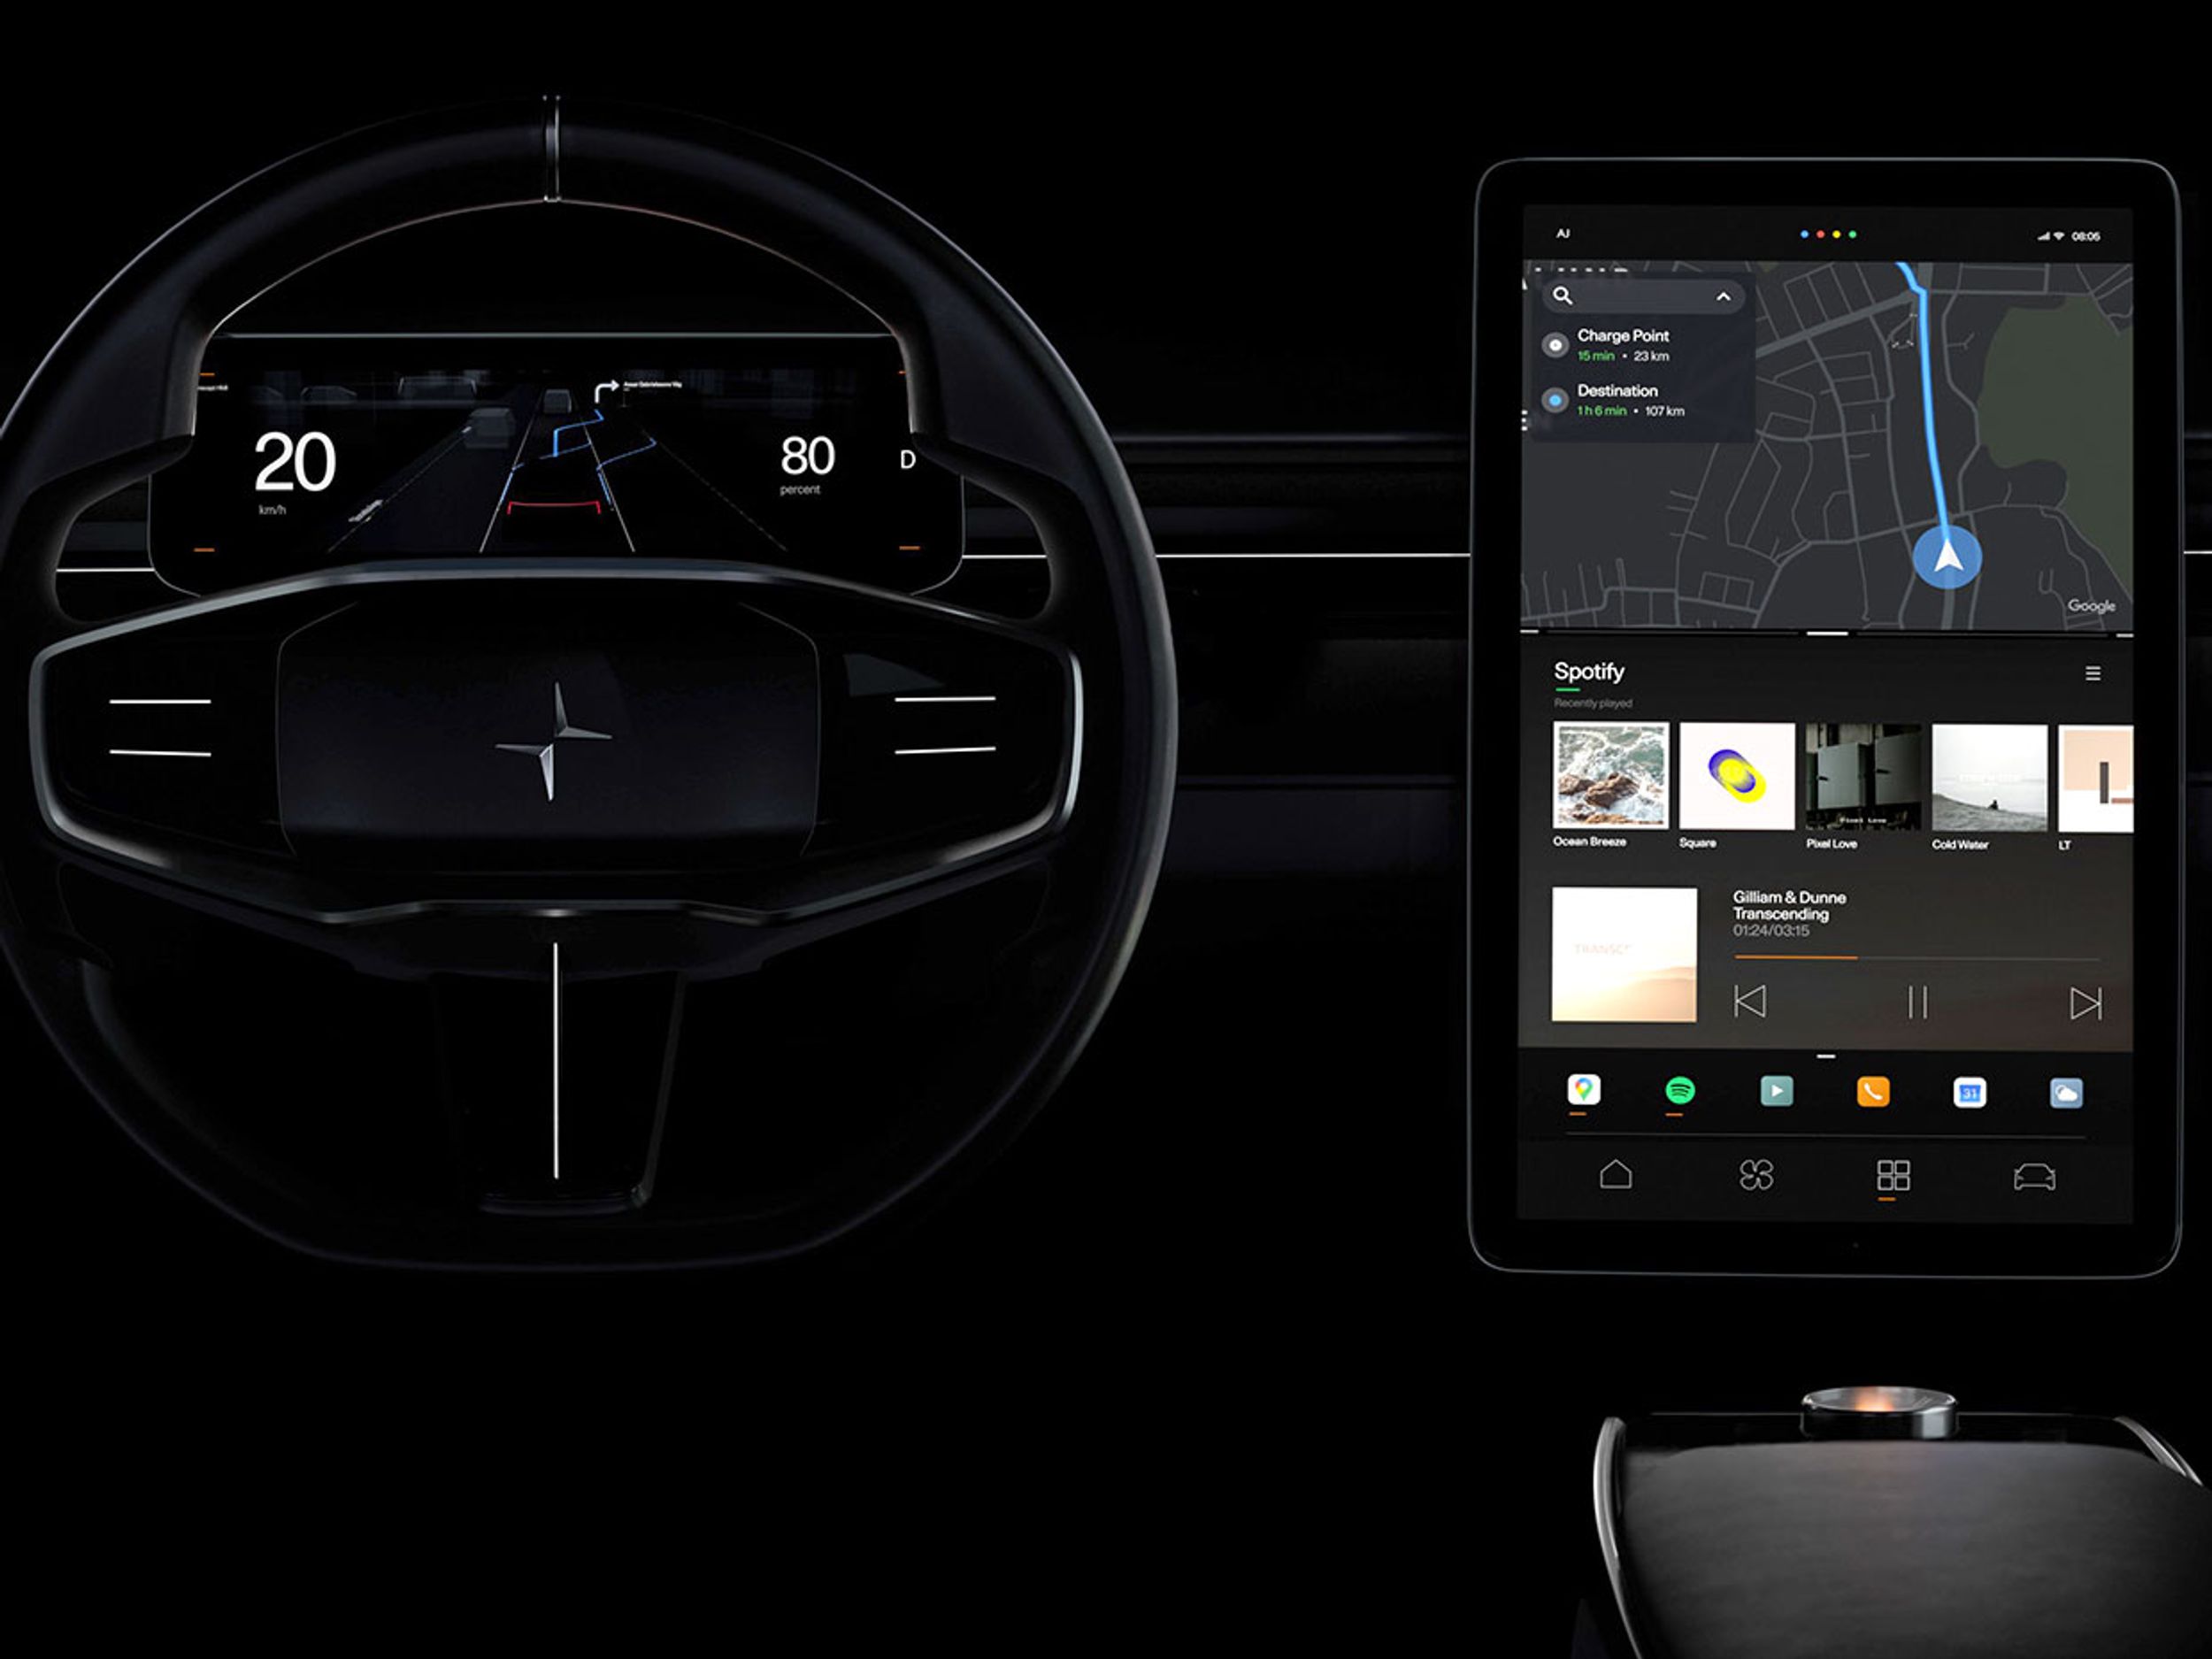 The NEXT-GEN Android OS system in the Polestar Precept.